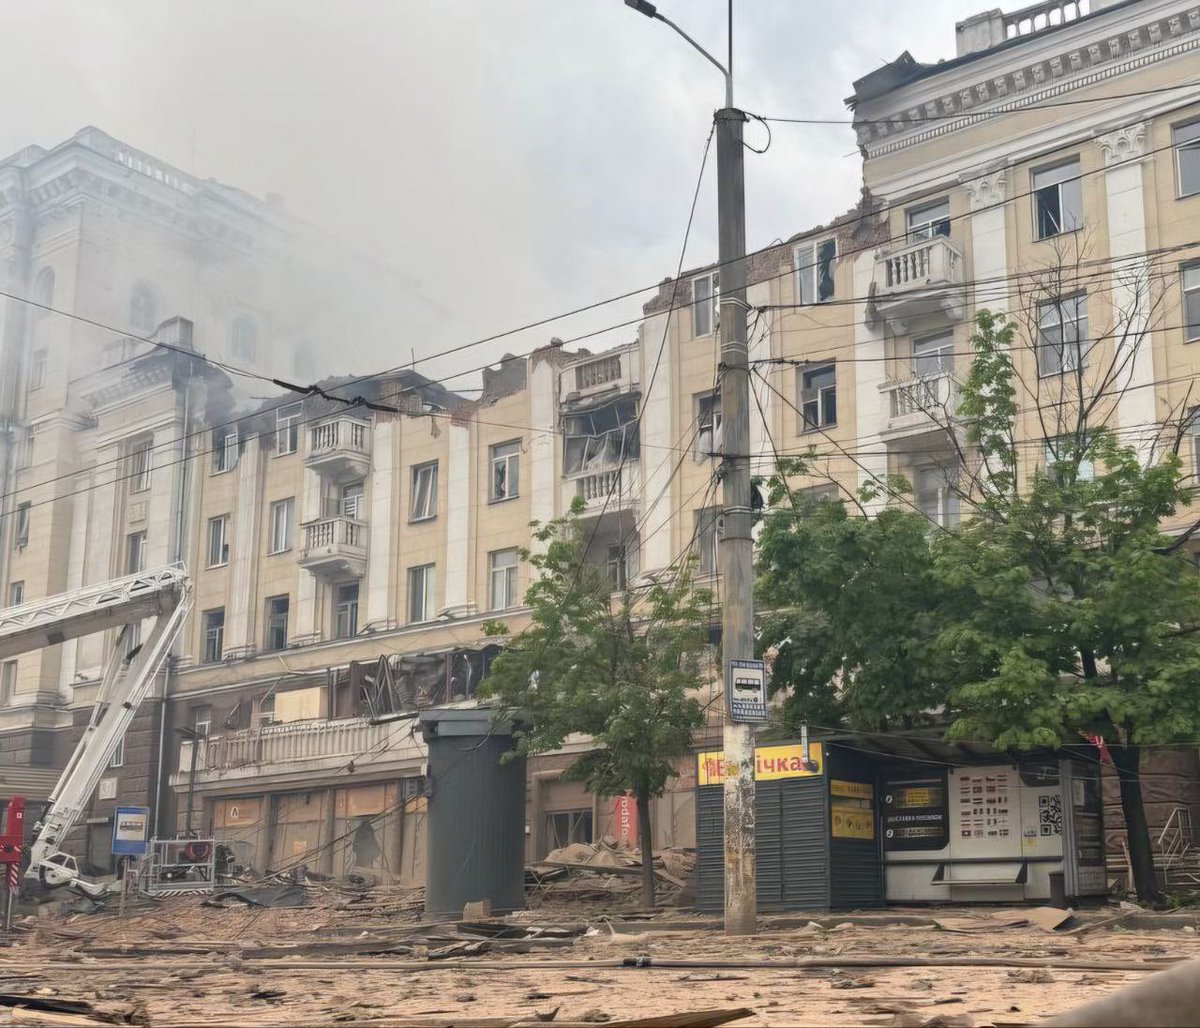 And this is what Russian missiles fired with Tupolev Tu-22M3s did to Dnipro this morning… two were killed, including an 8-year-old kid. Russia’s terror bombing of Ukraine continues almost totally unpunished.